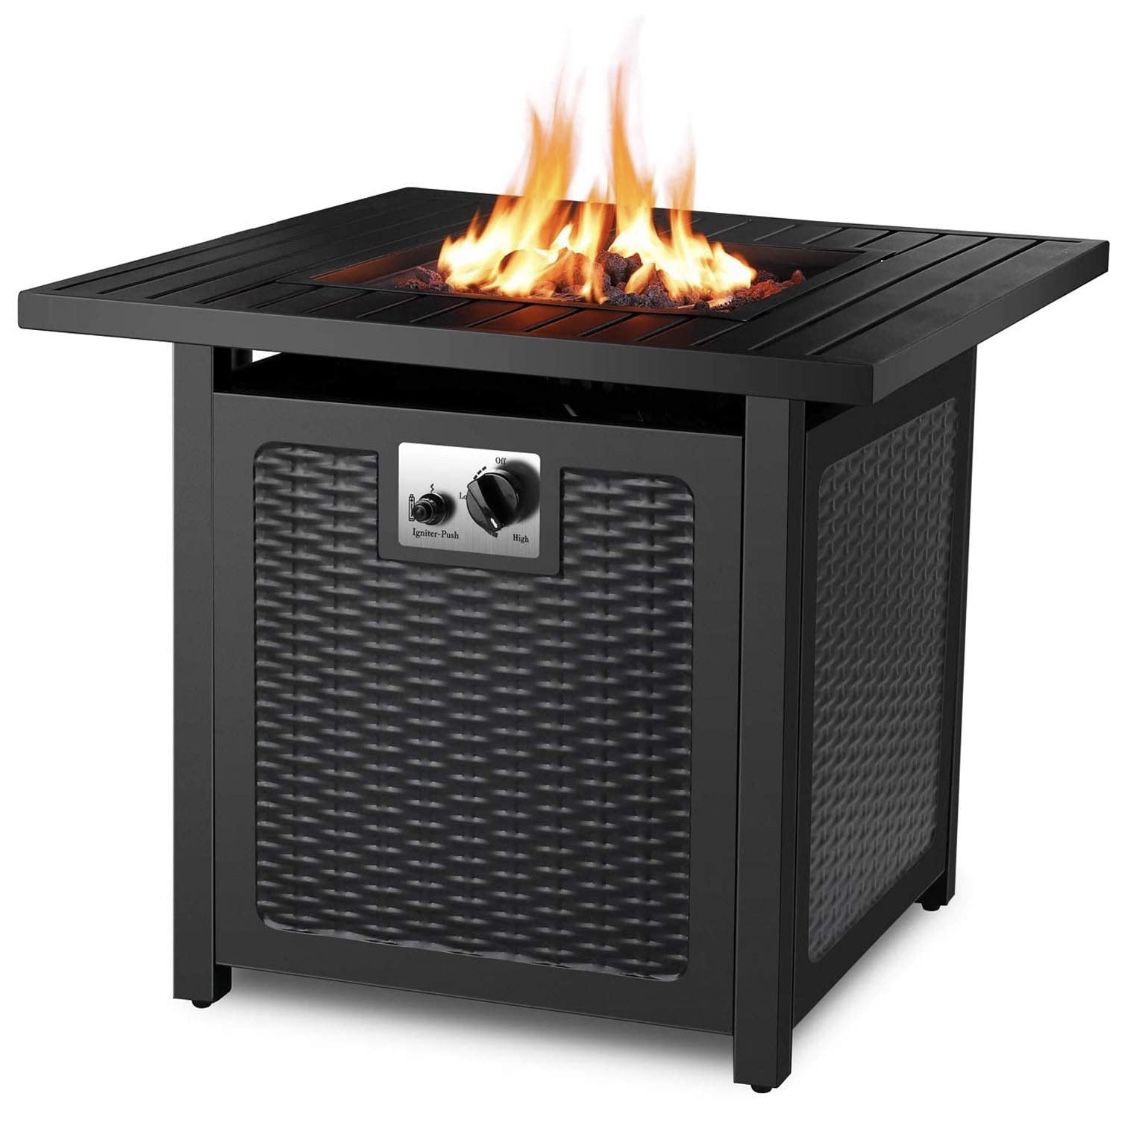 30” Propane Fire Pit Table